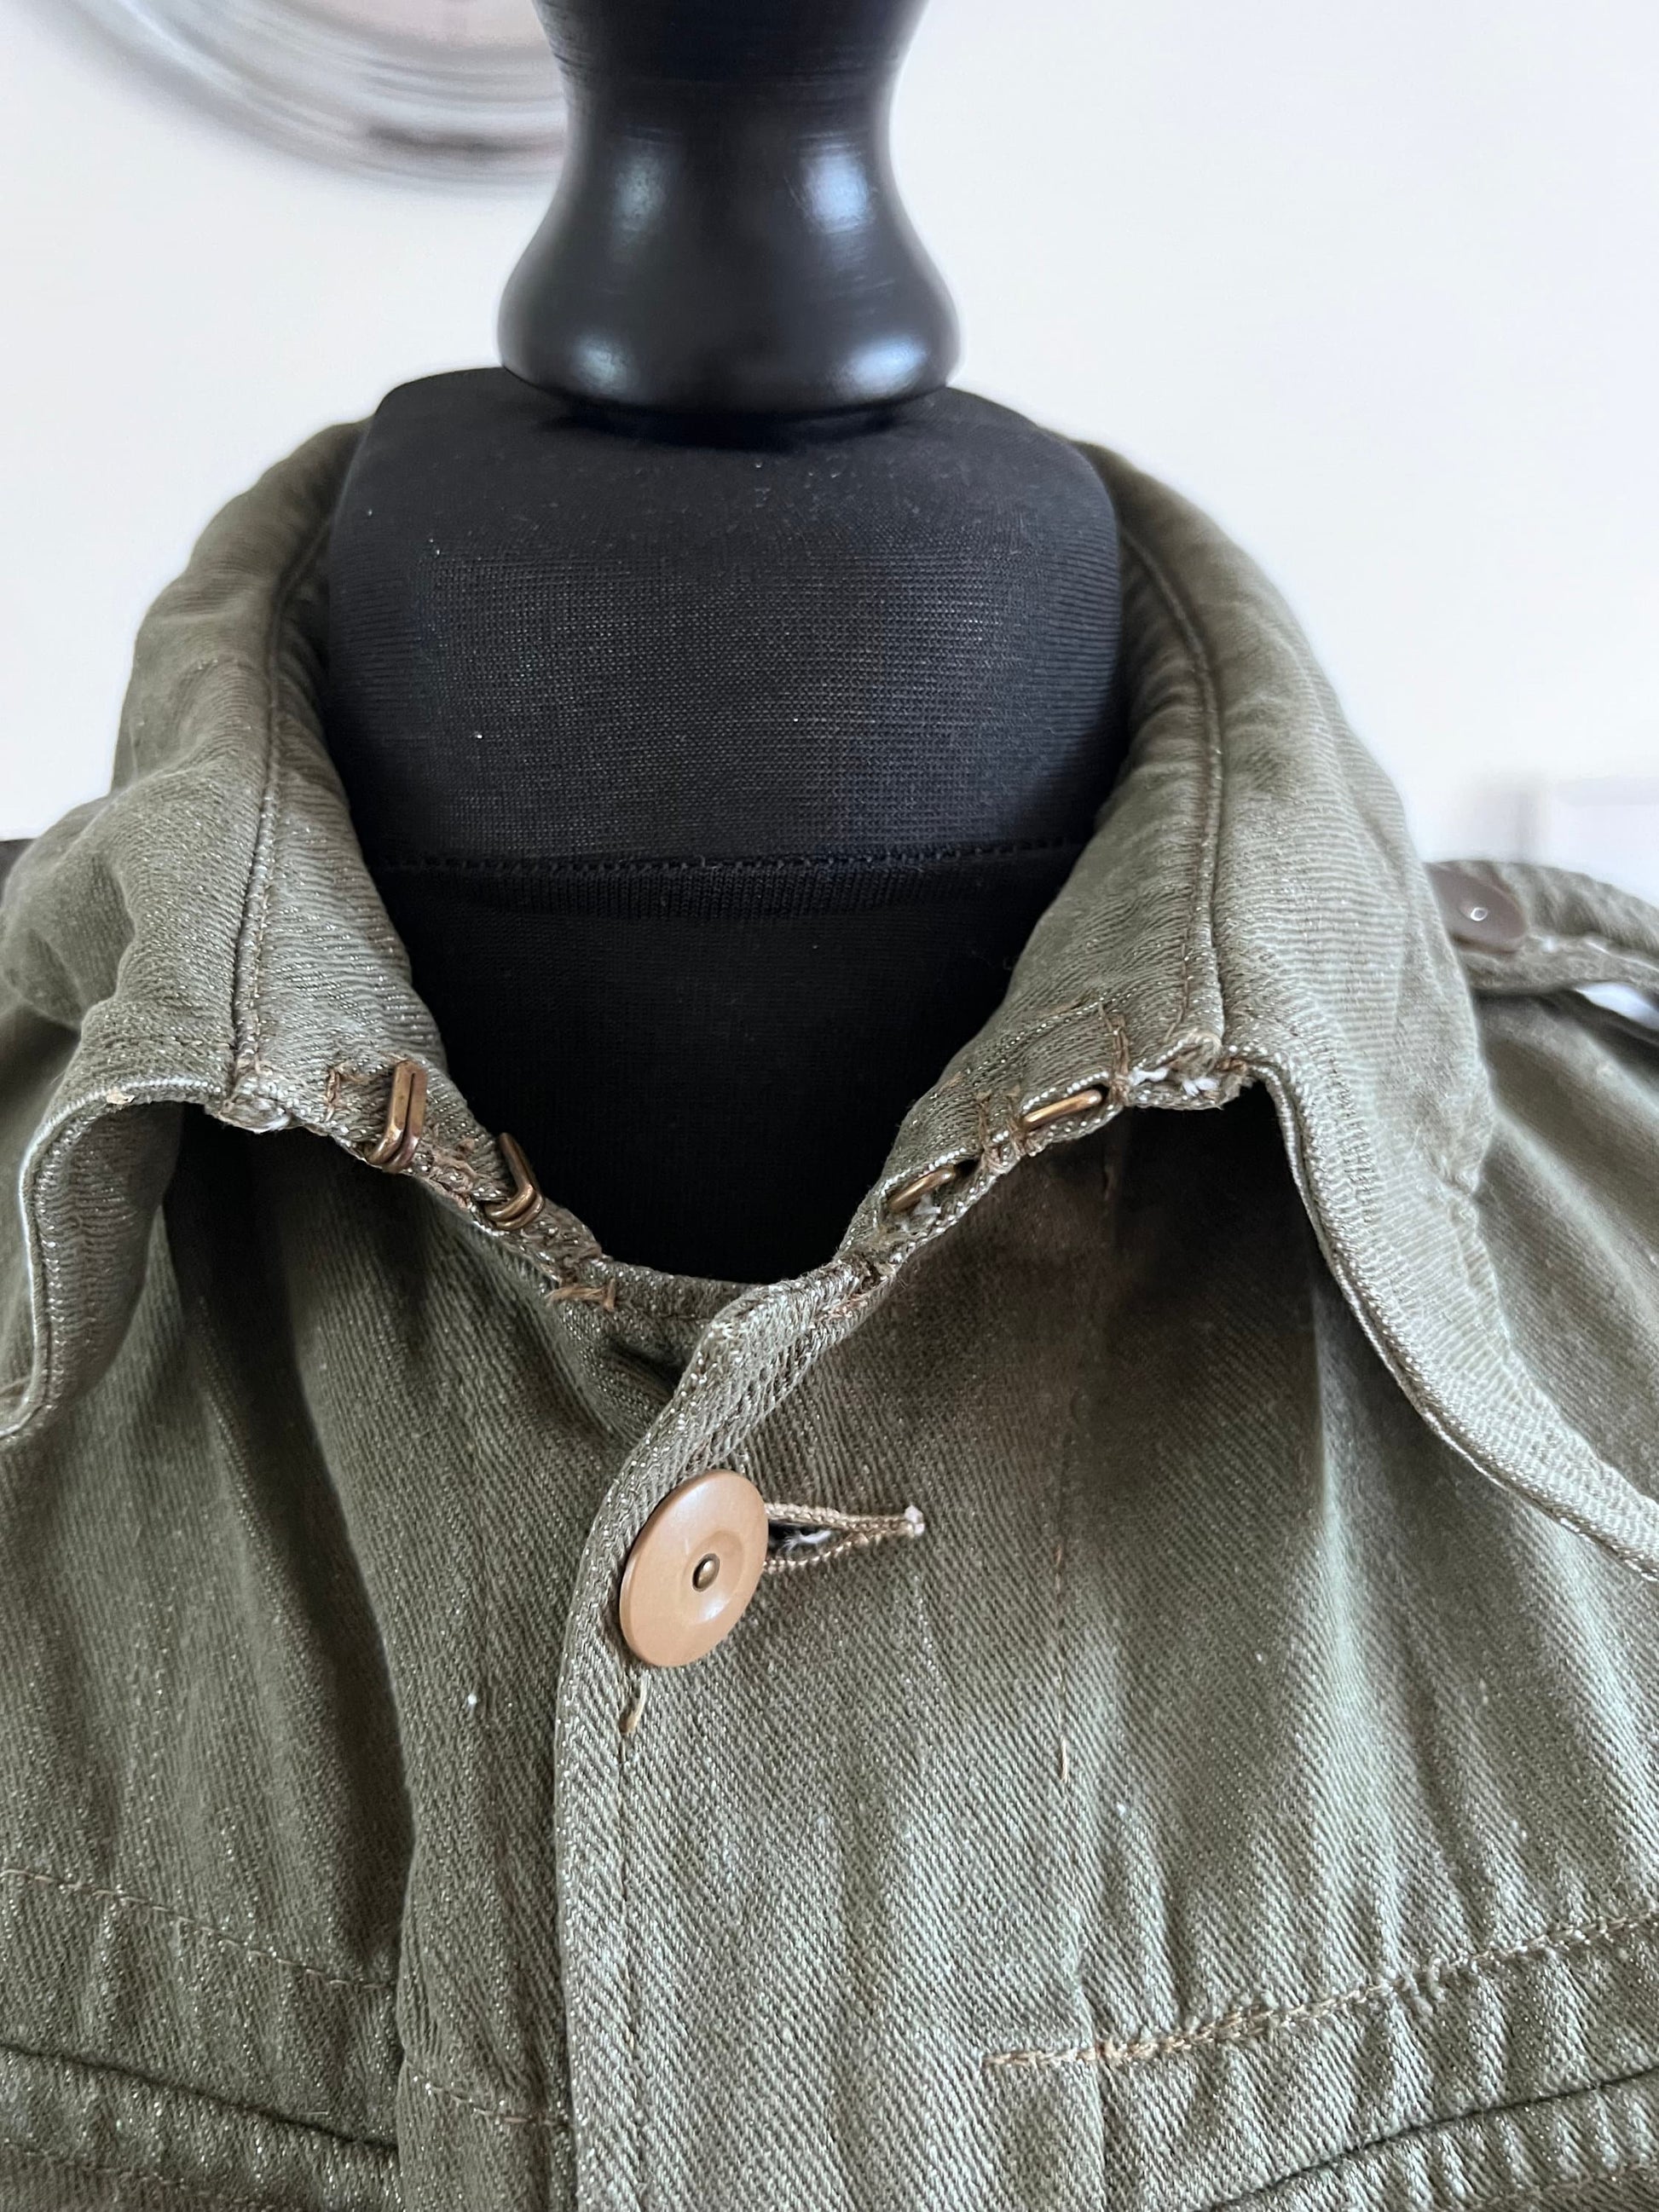 Vintage 1952 British Army Royal Marines Military Overalls Denim Blouse Olive Green Jacket S/M